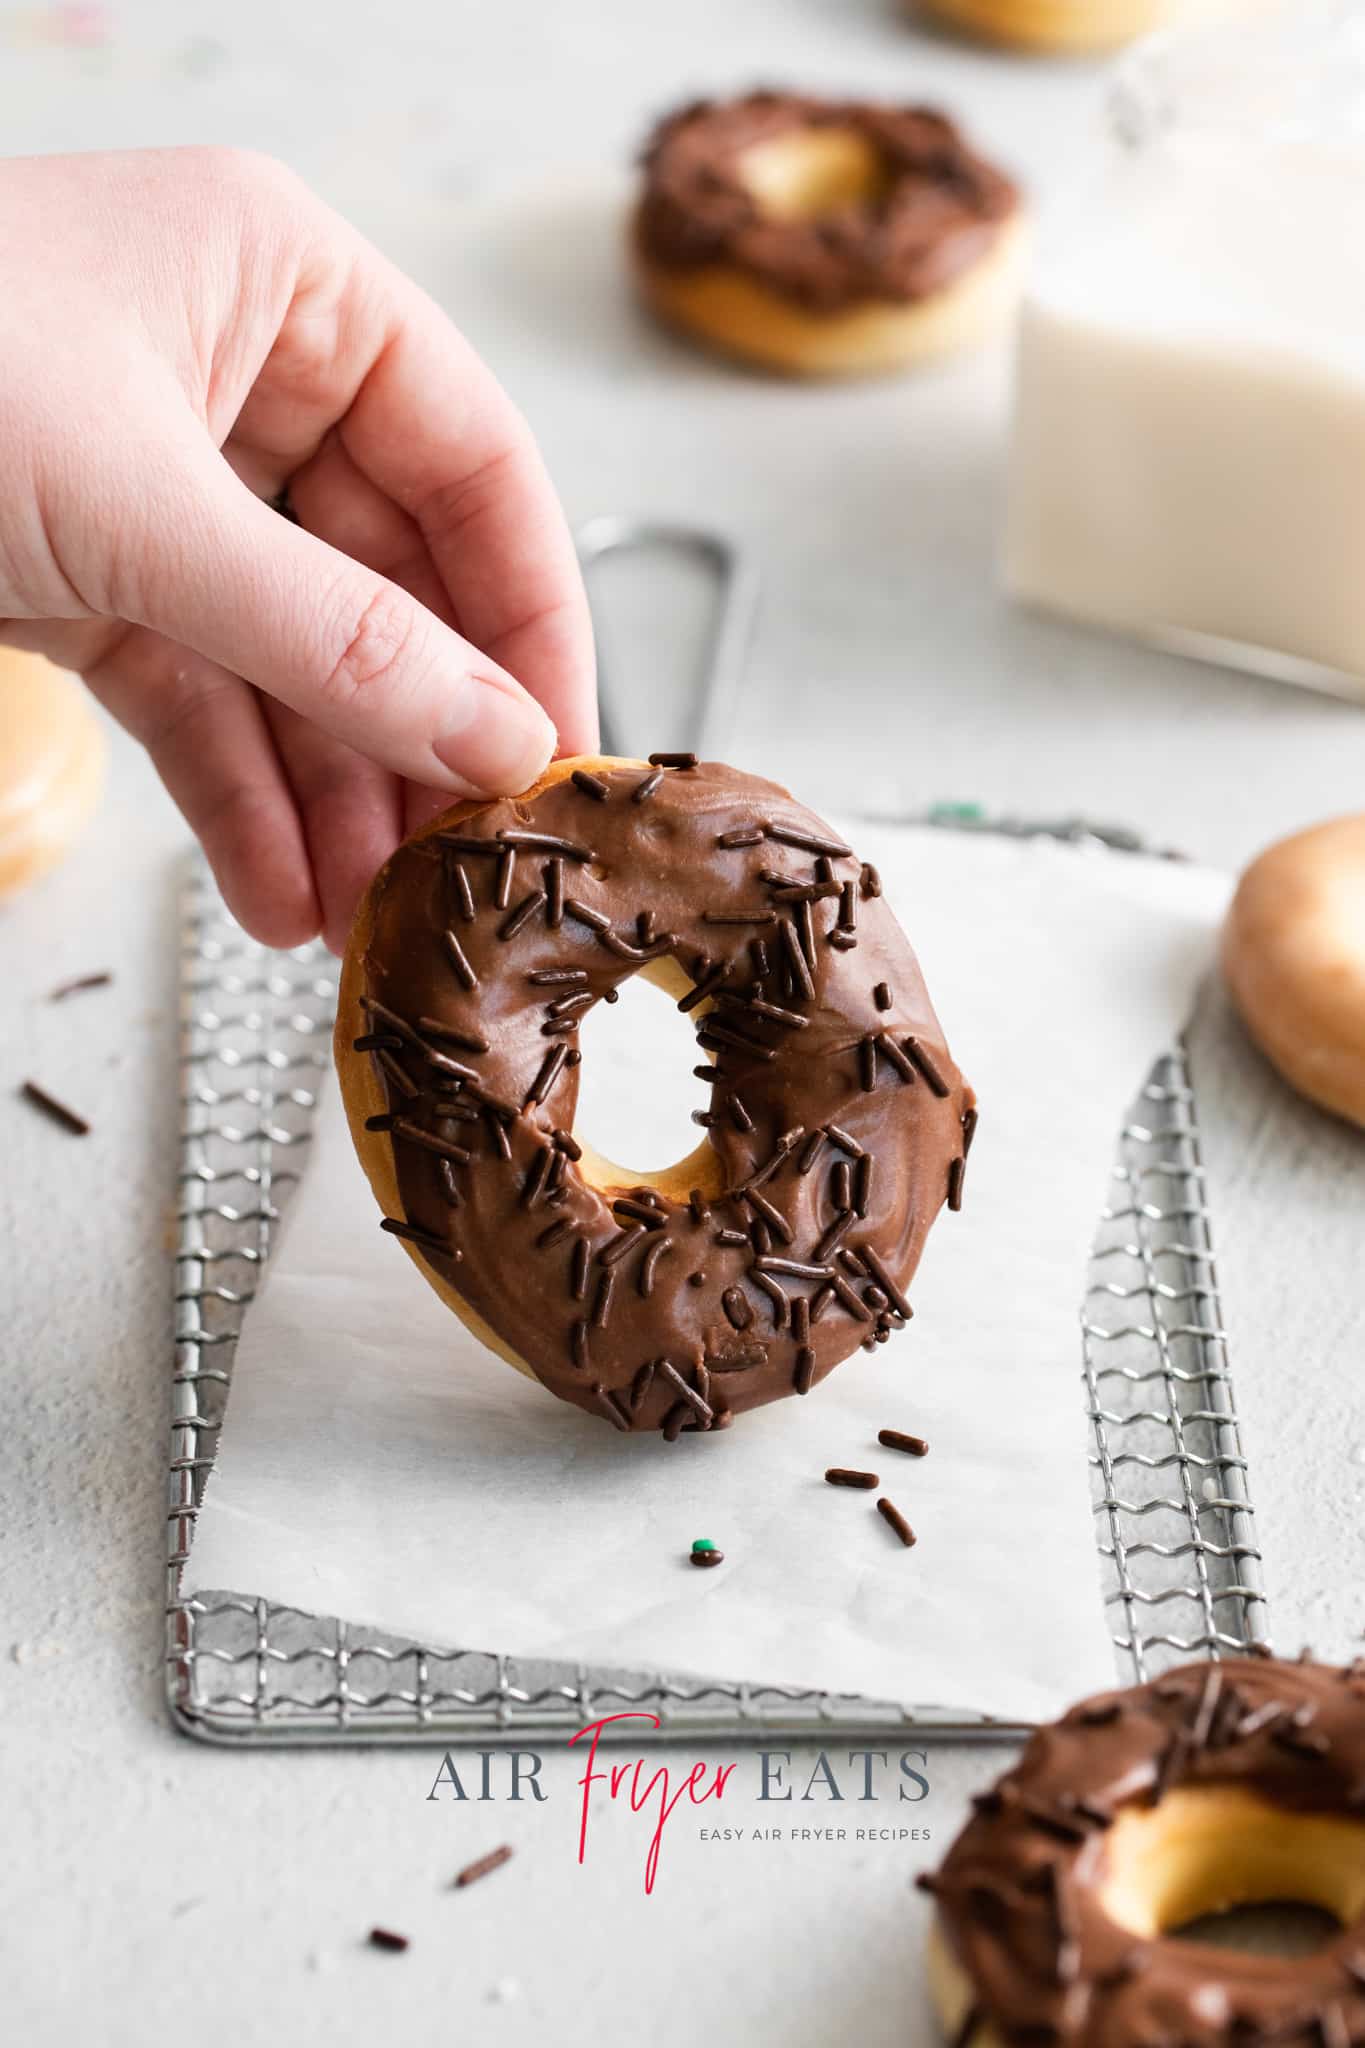 Photo of a hand lifting an air fryer doughnut covered in chocolate frosting and chocolate sprinkles, on a parchment-lined cooling rack.